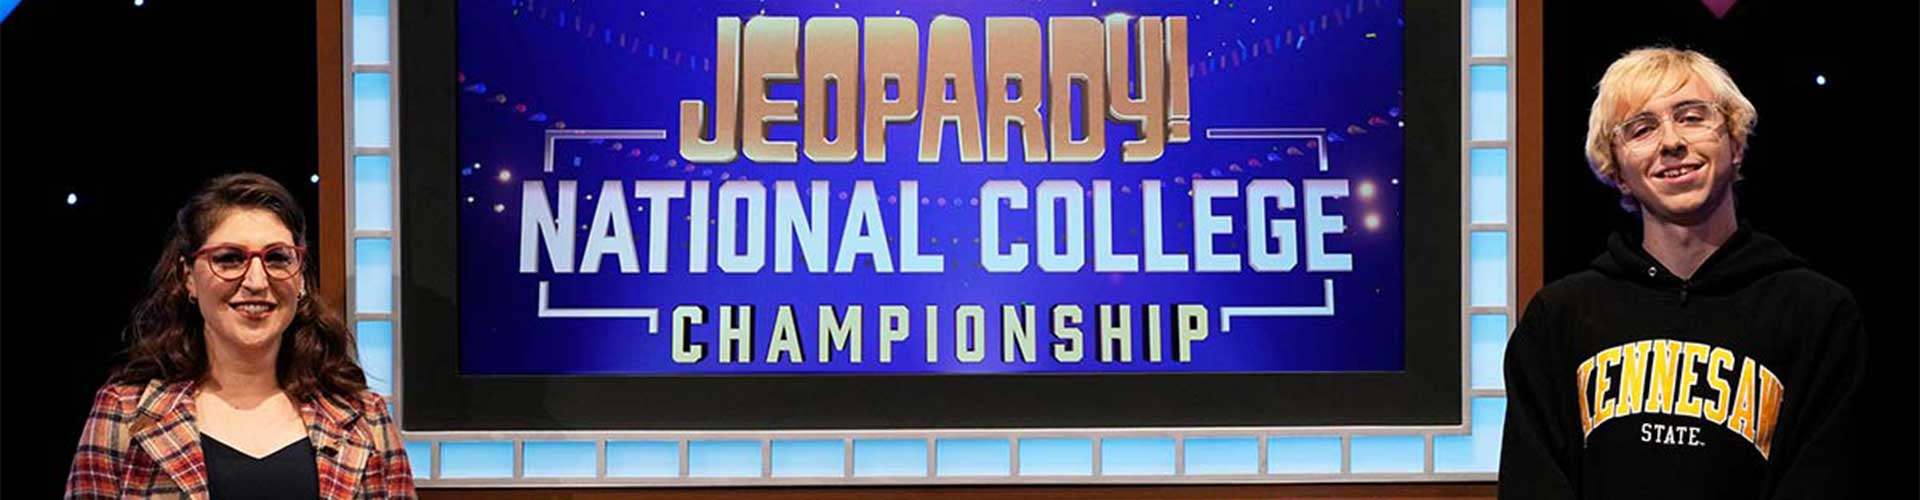 Geospatial Sciences Graduate Represents Kennesaw State on 'Jeopardy!' National College Championship